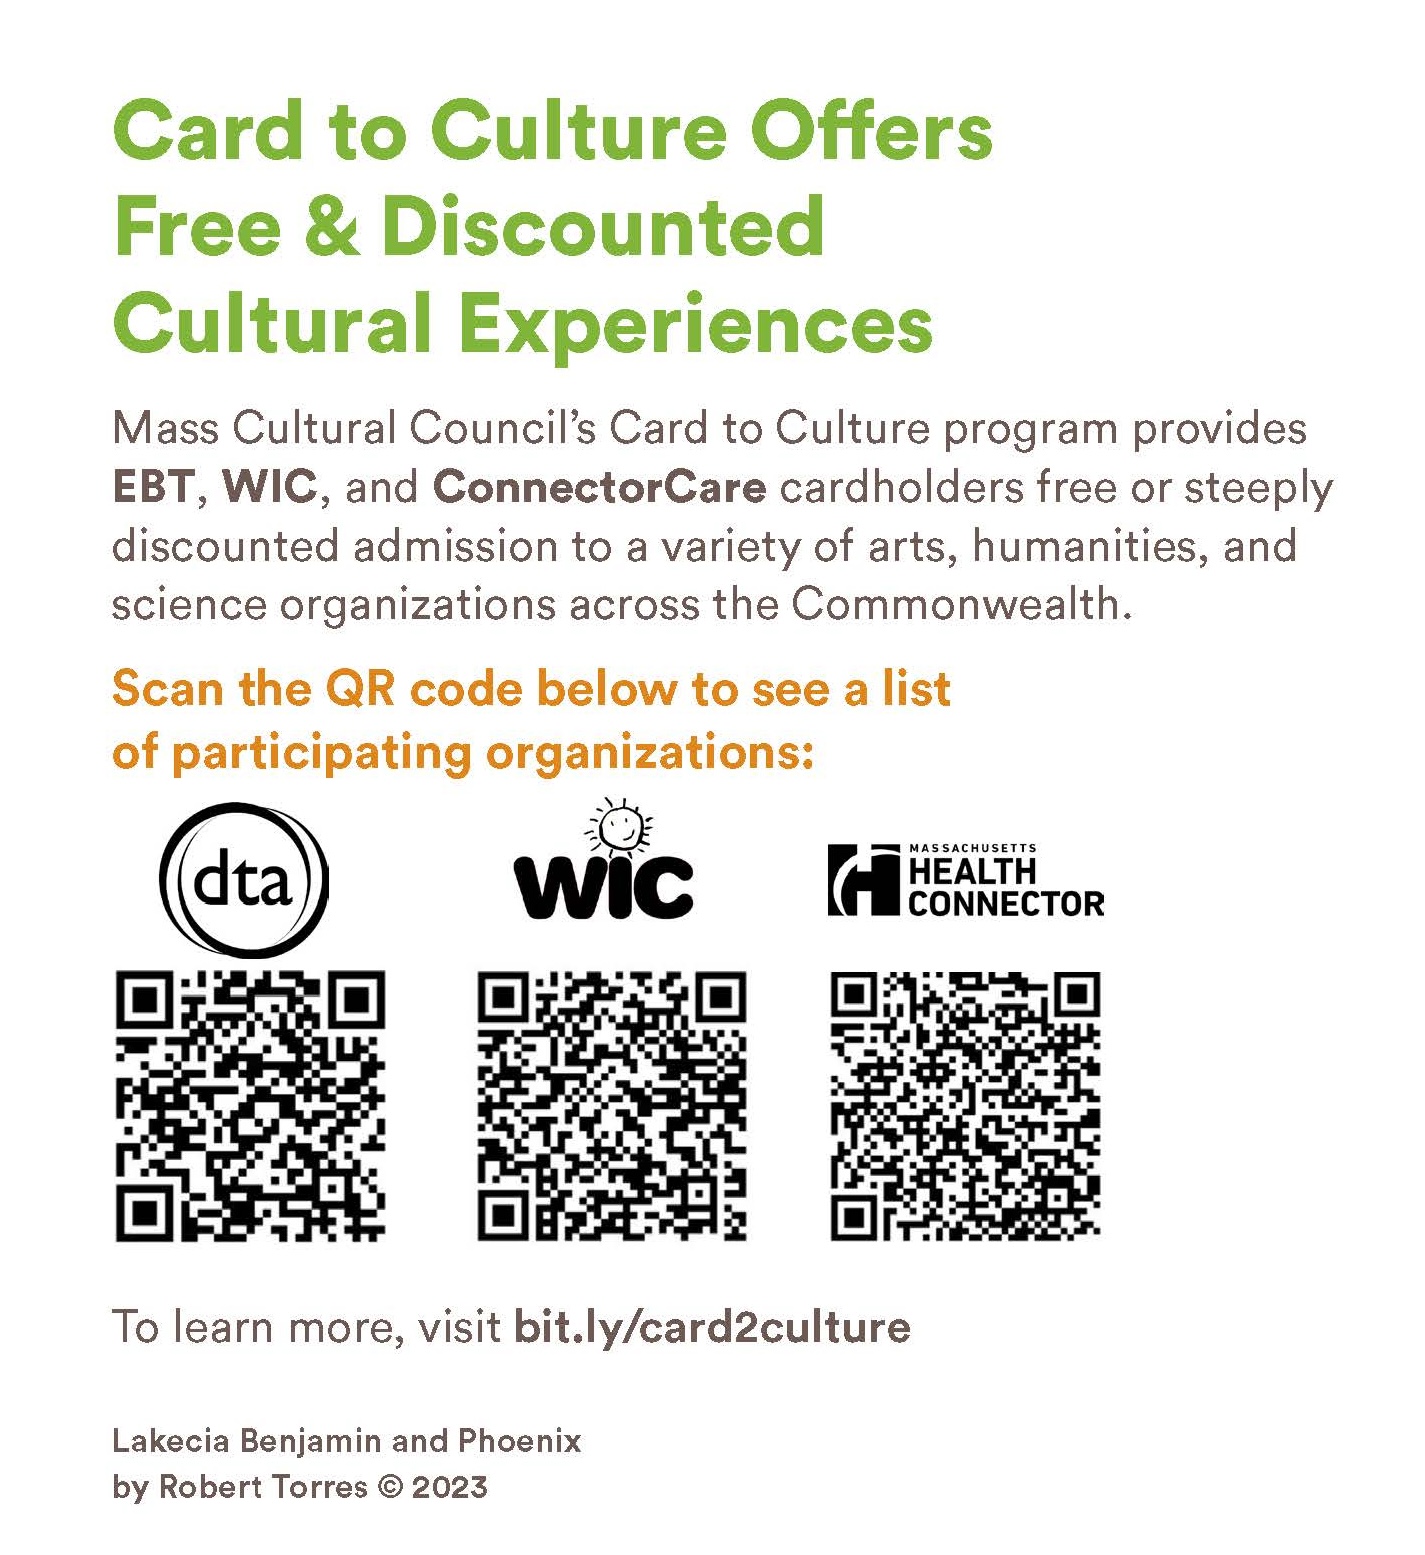 Card to Culture Offers
Free & Discounted
Cultural Experiences